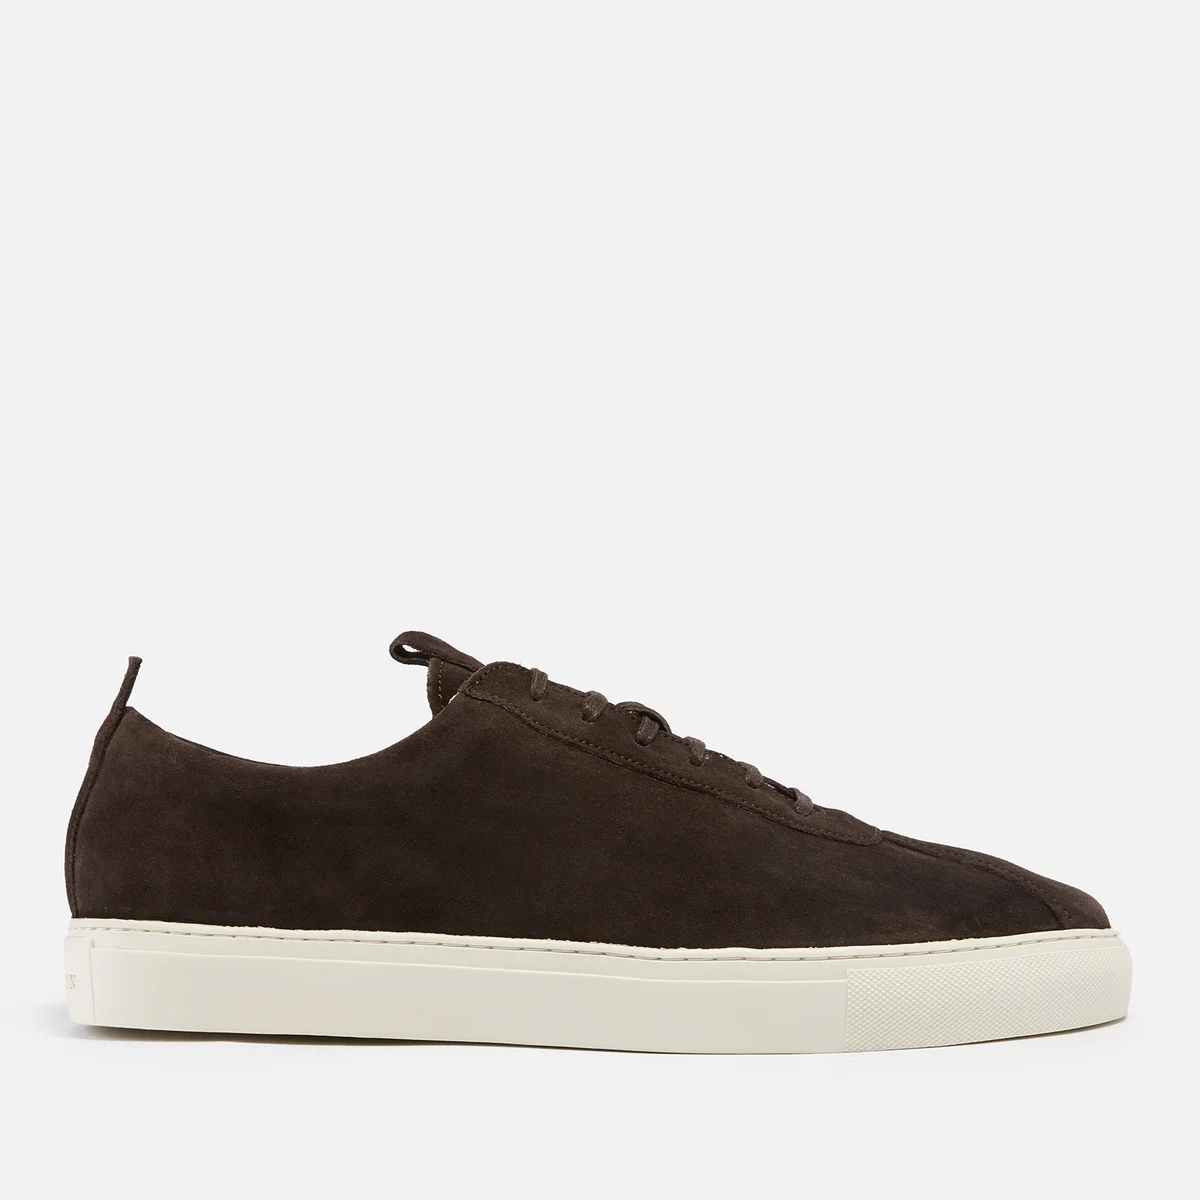 Grenson 1 Suede Trainers Image 1